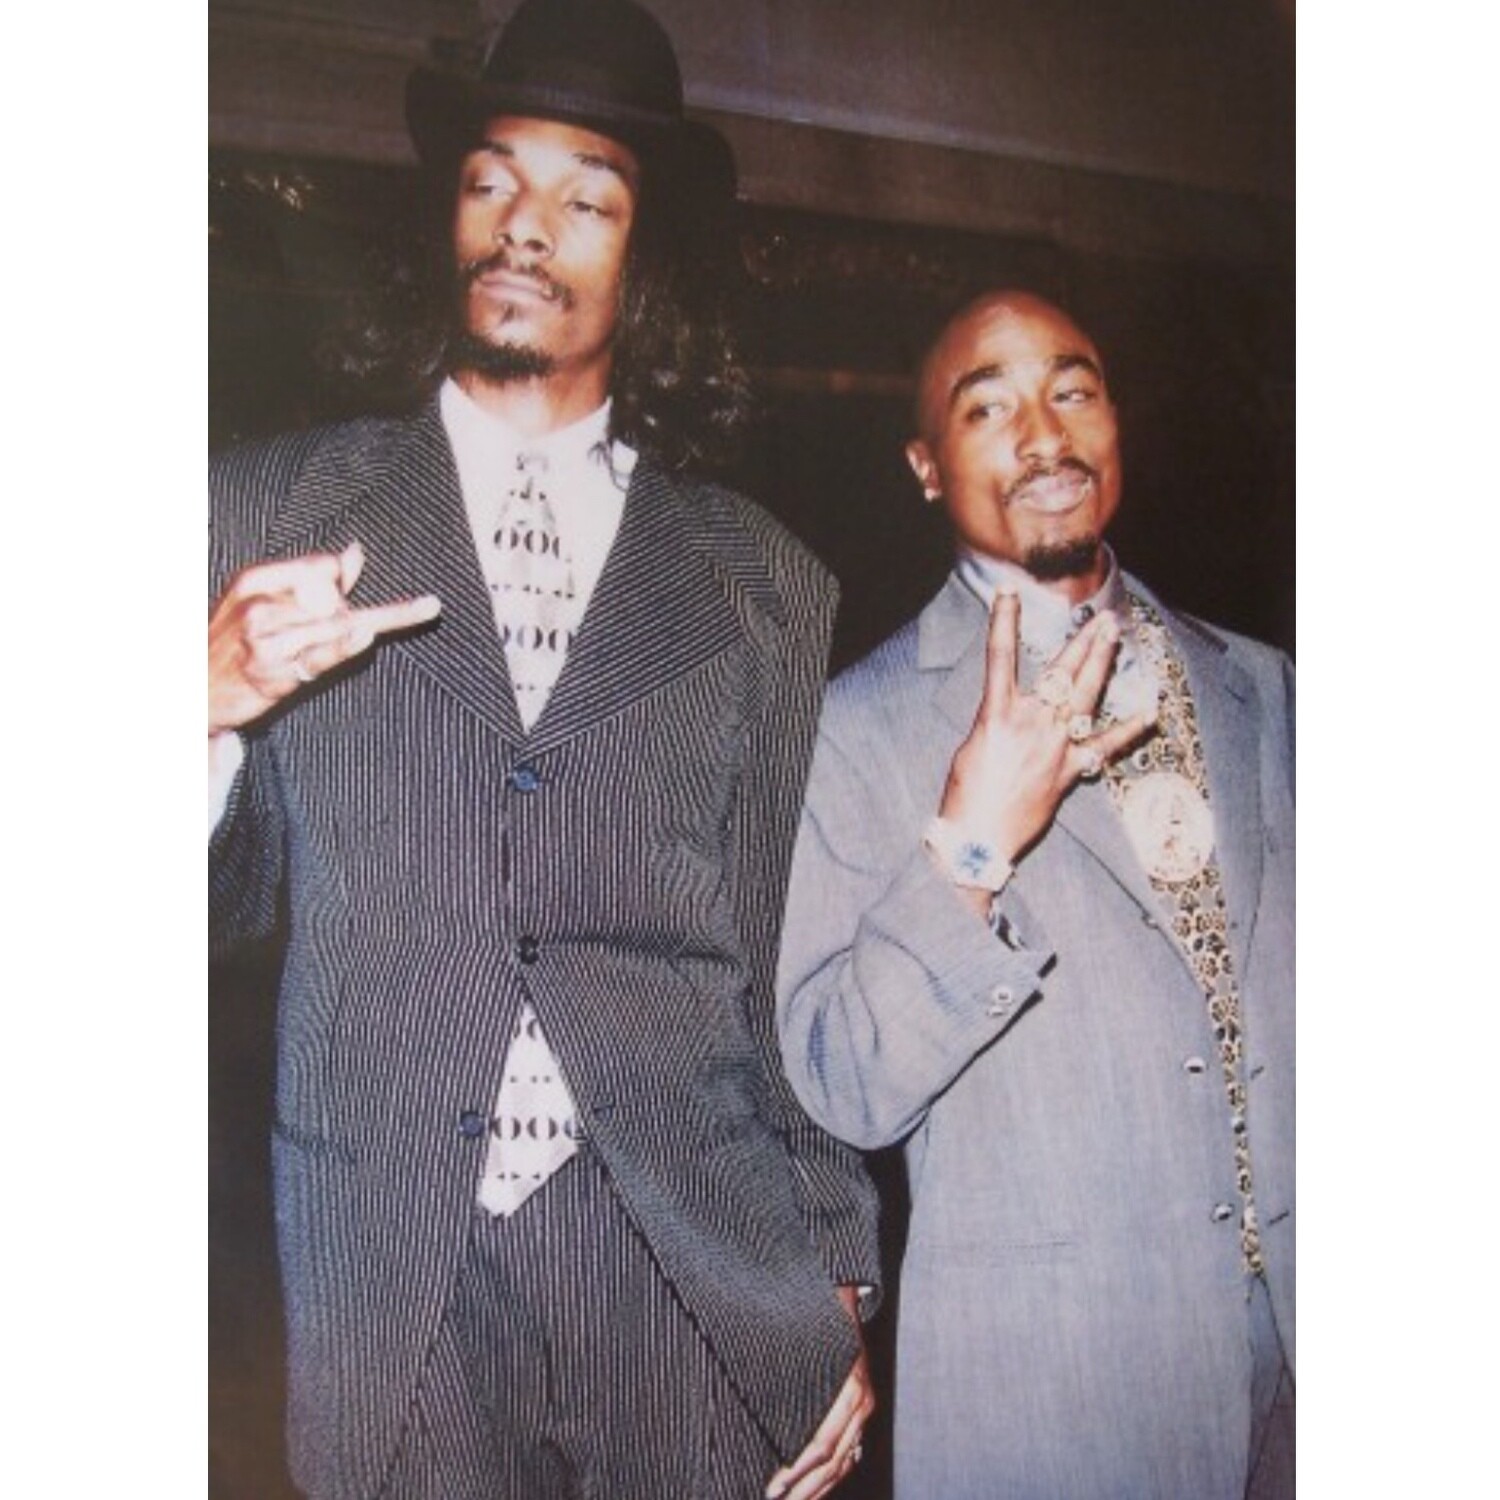 TUPAC AND SNOOP SUITS POSTER